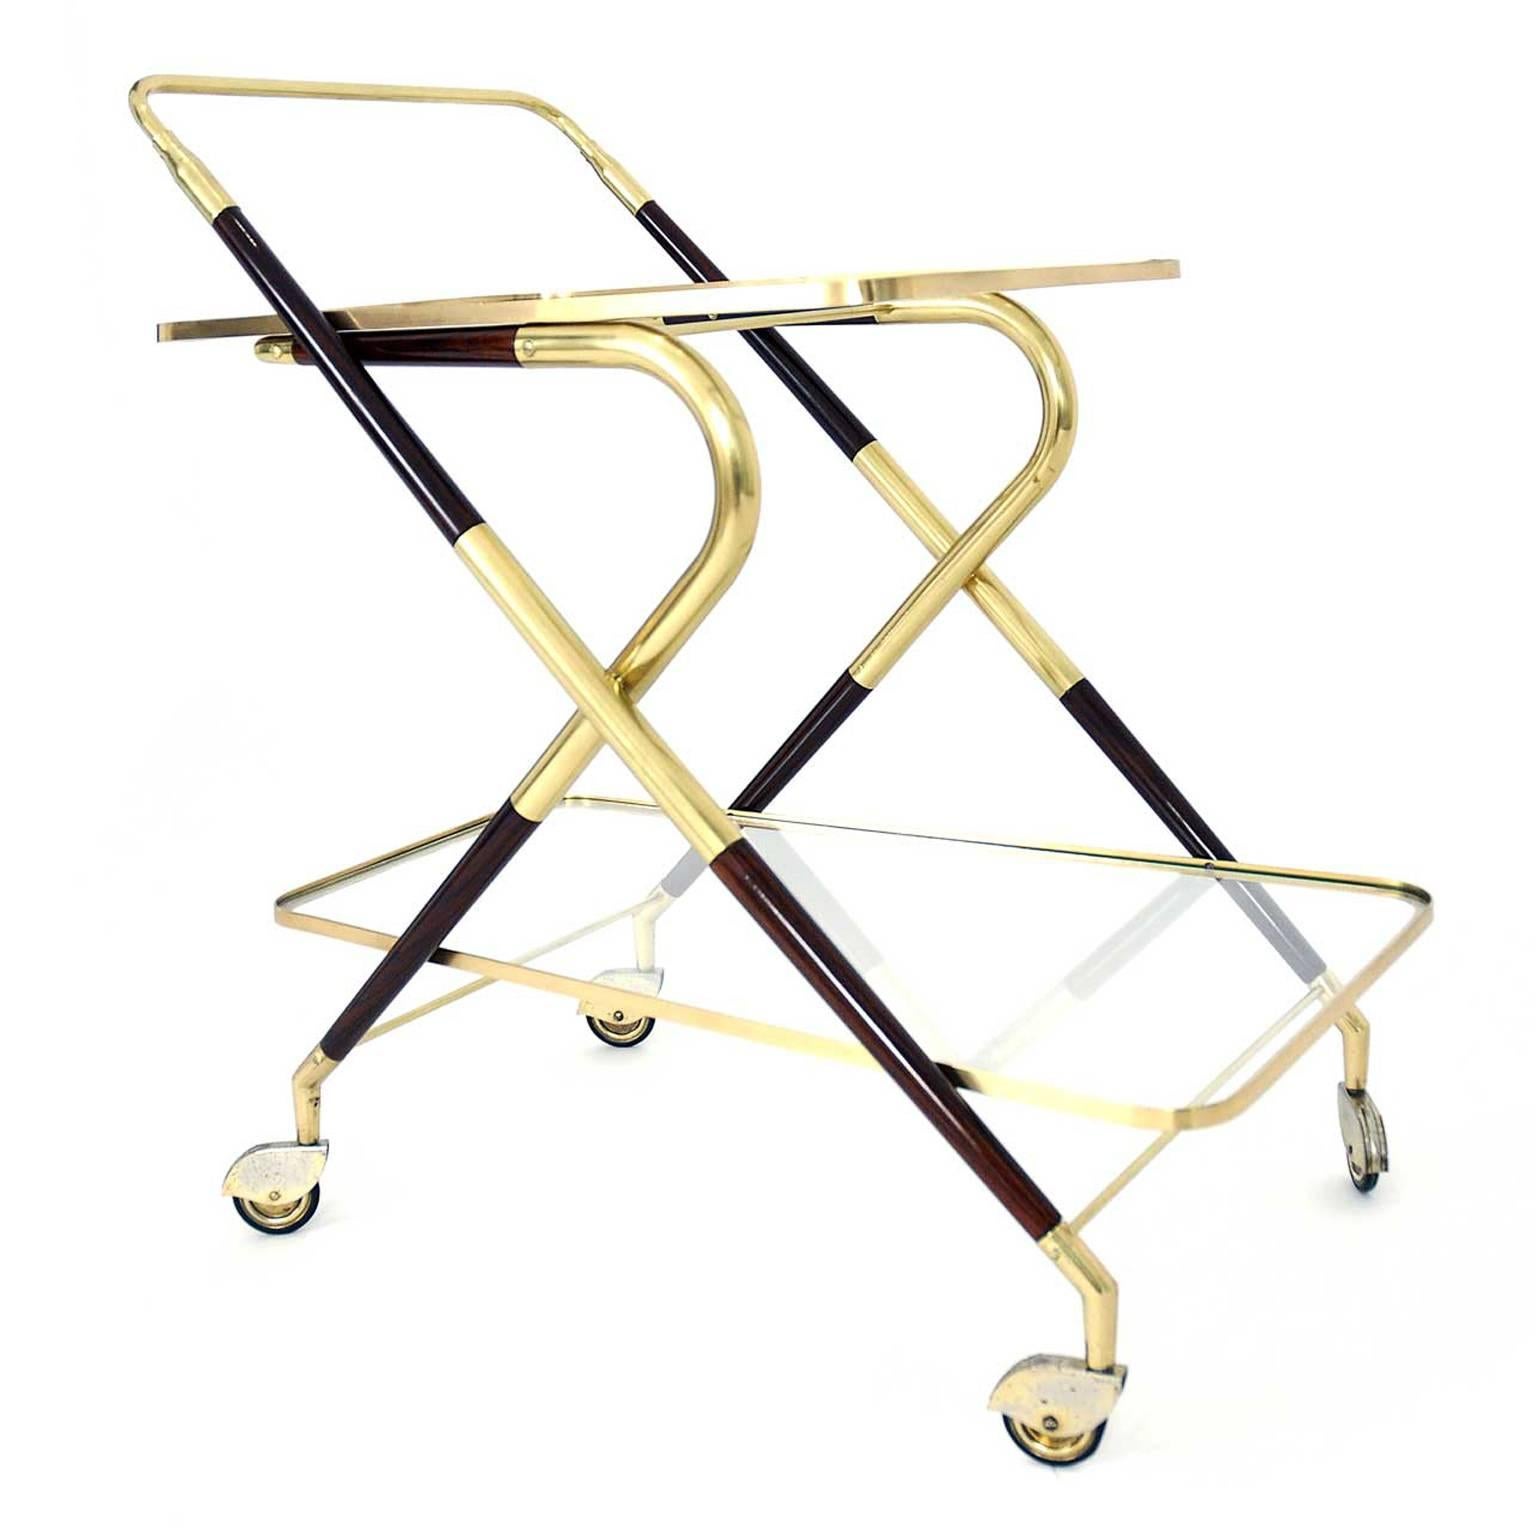 The frame of the serving cart is made of brass and wood, which is stained in mahogany. The wheels are also made of brass. The piece was designed in 1950 in Italy.